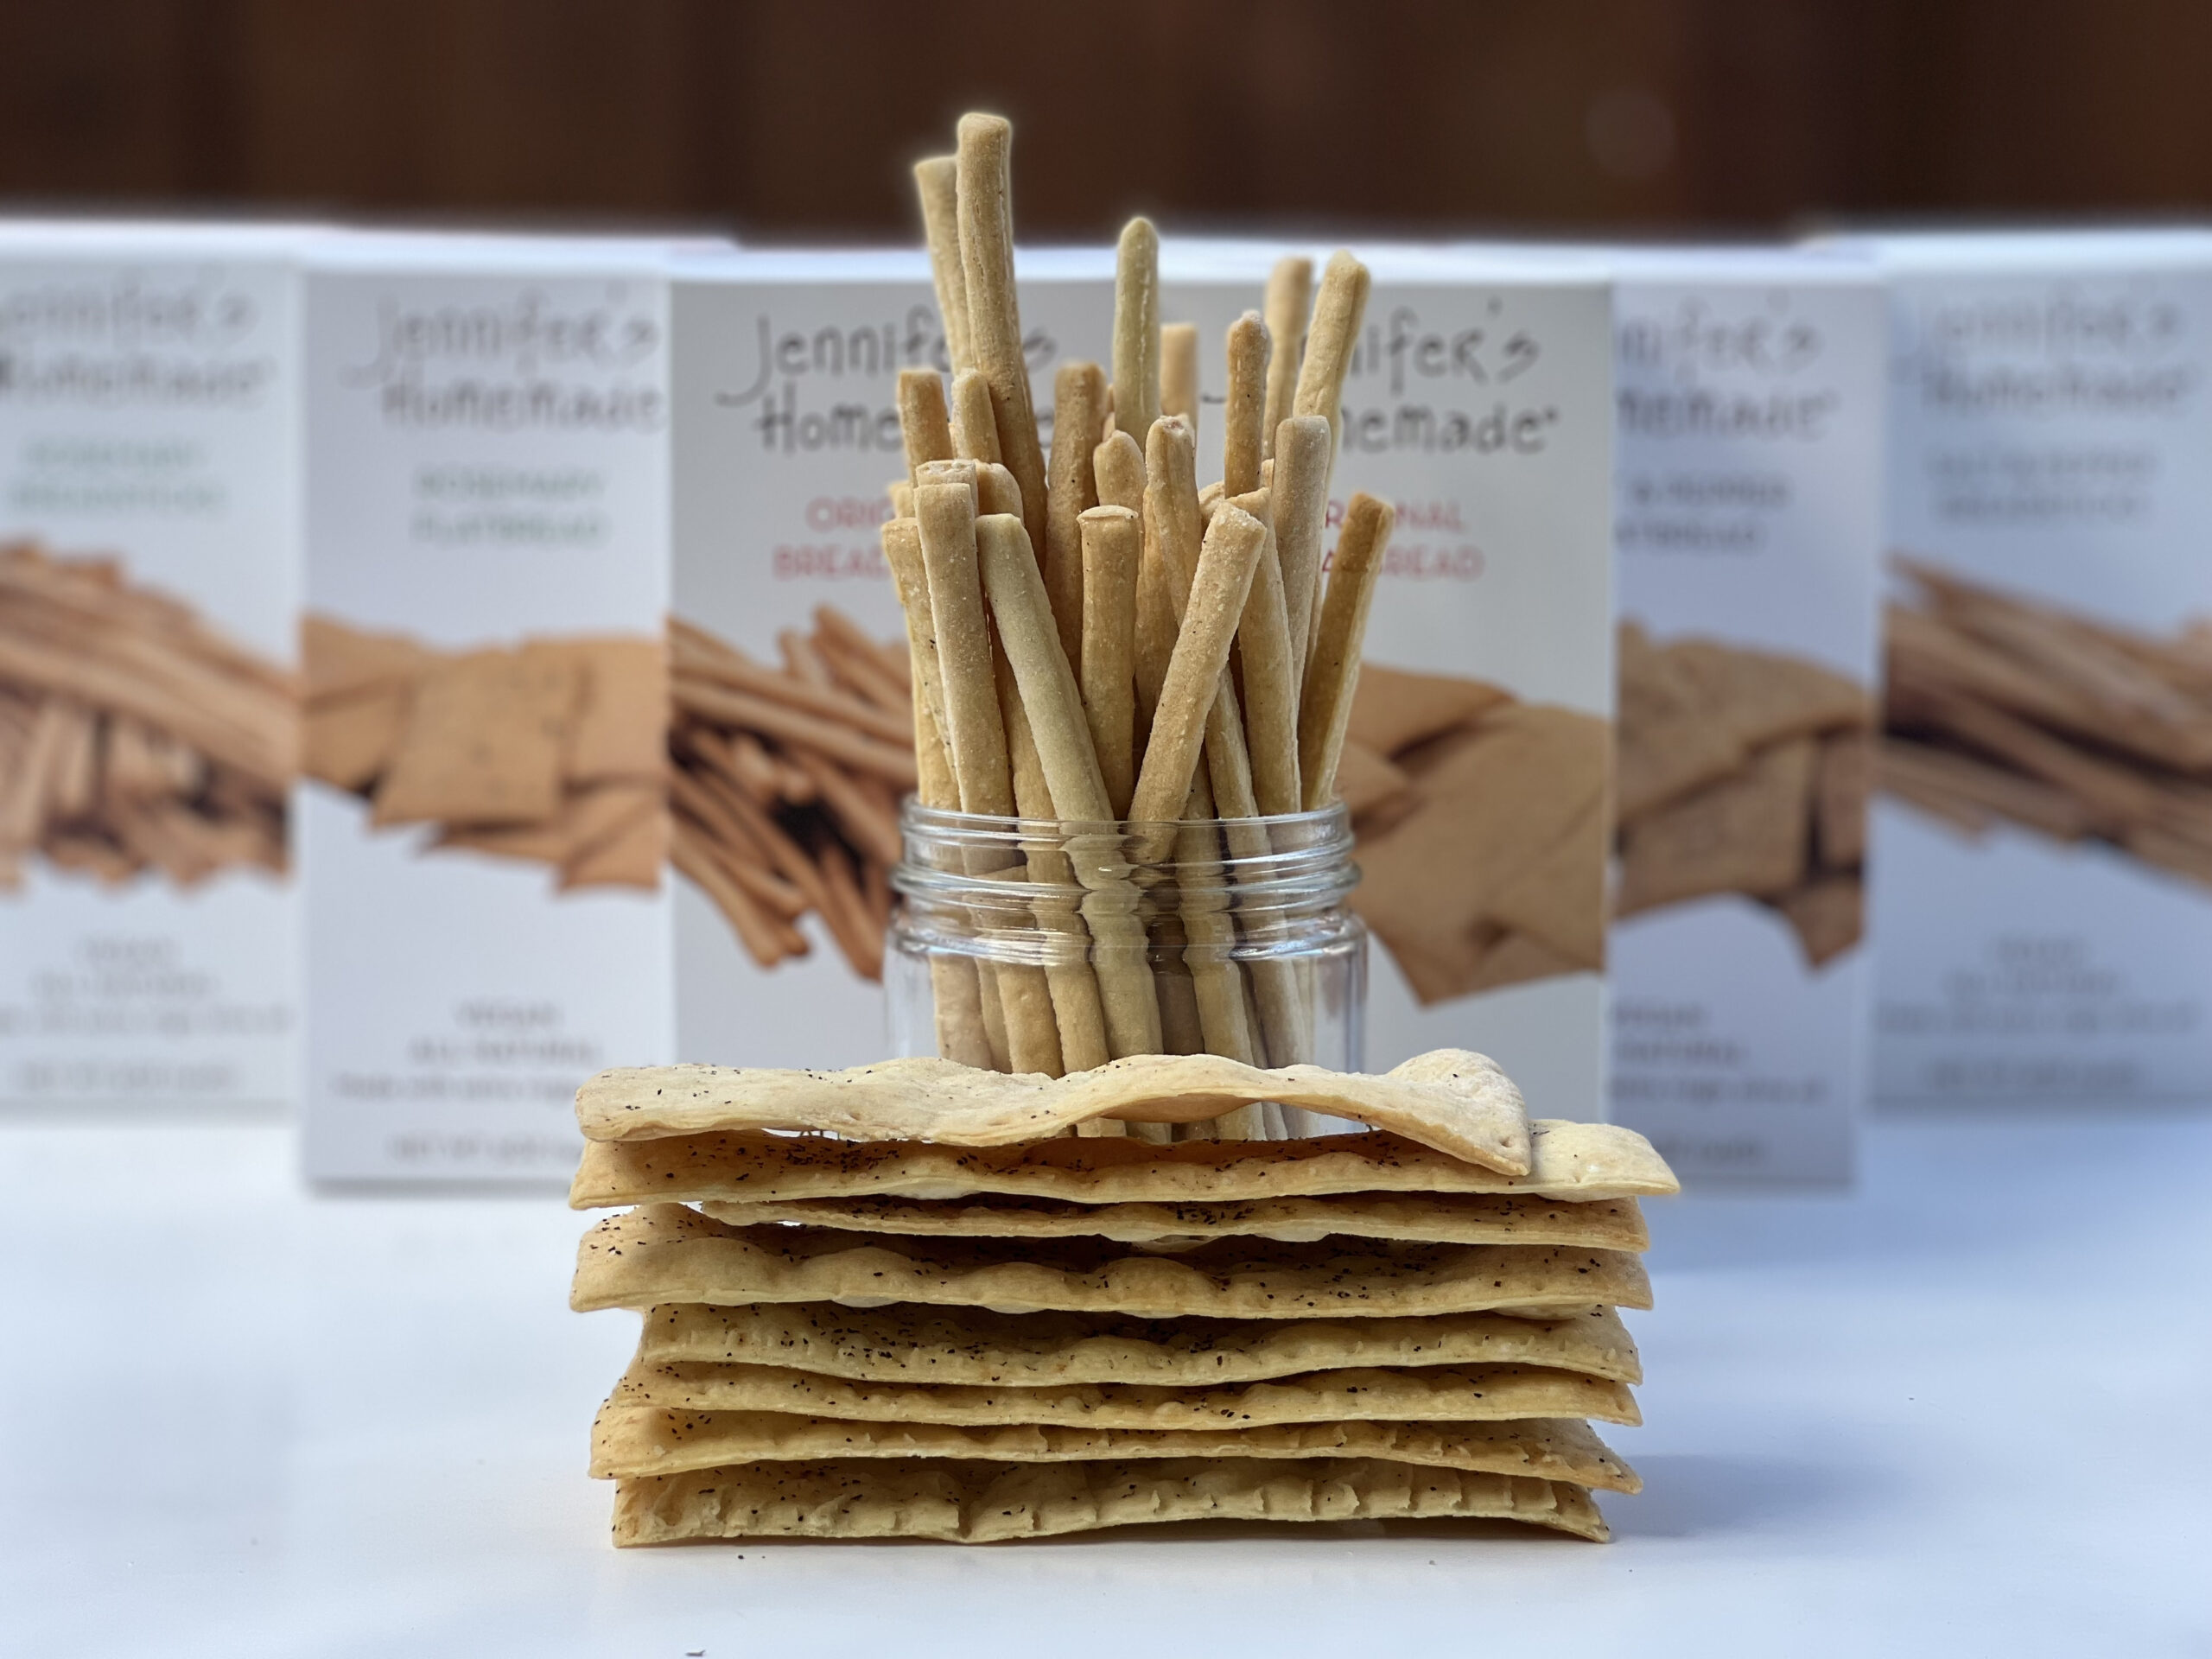 beauty shot of Jennifer's Homemade Breadsticks and Flatbreads packaged and unpackaged